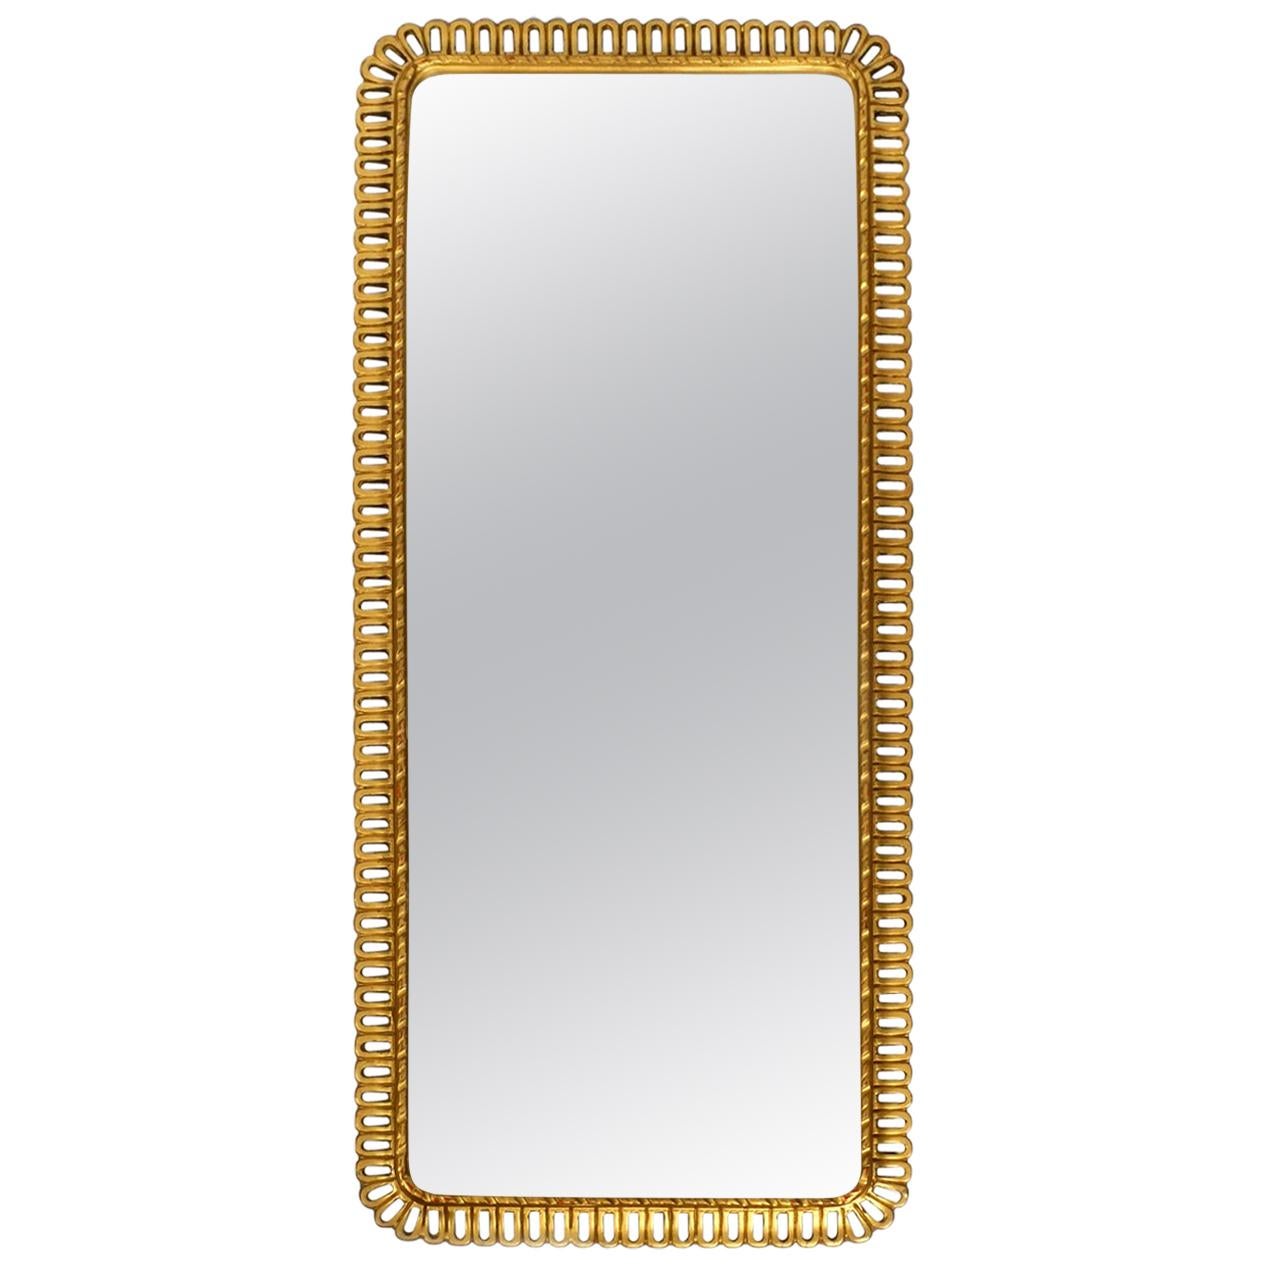 Extra Large Midcentury Wall Mirror by Schöninger with Gilded Wooden Frame